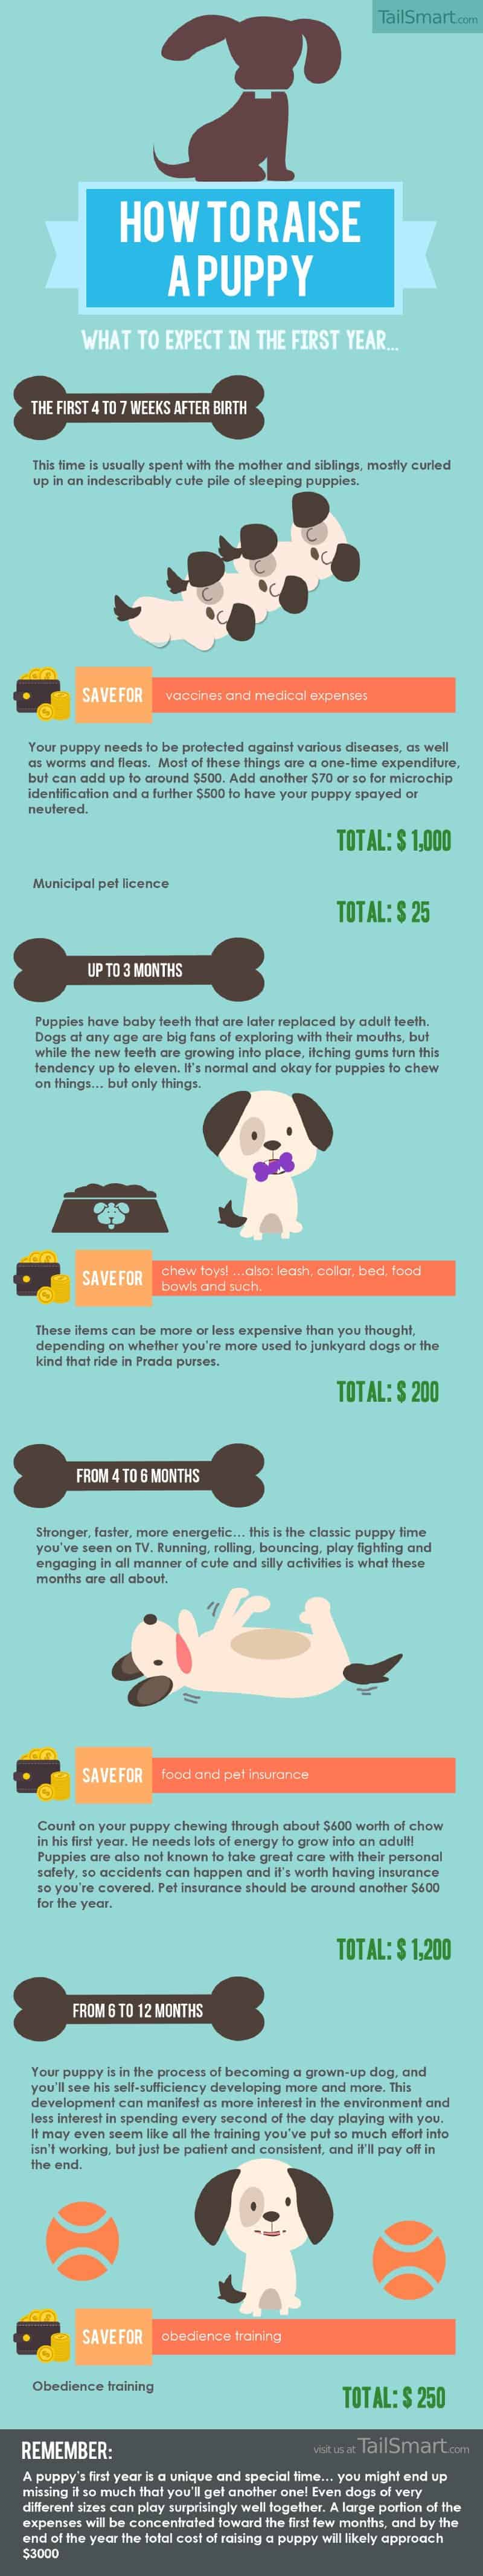 Infographic describing what a new puppy owner can expect in the first year.